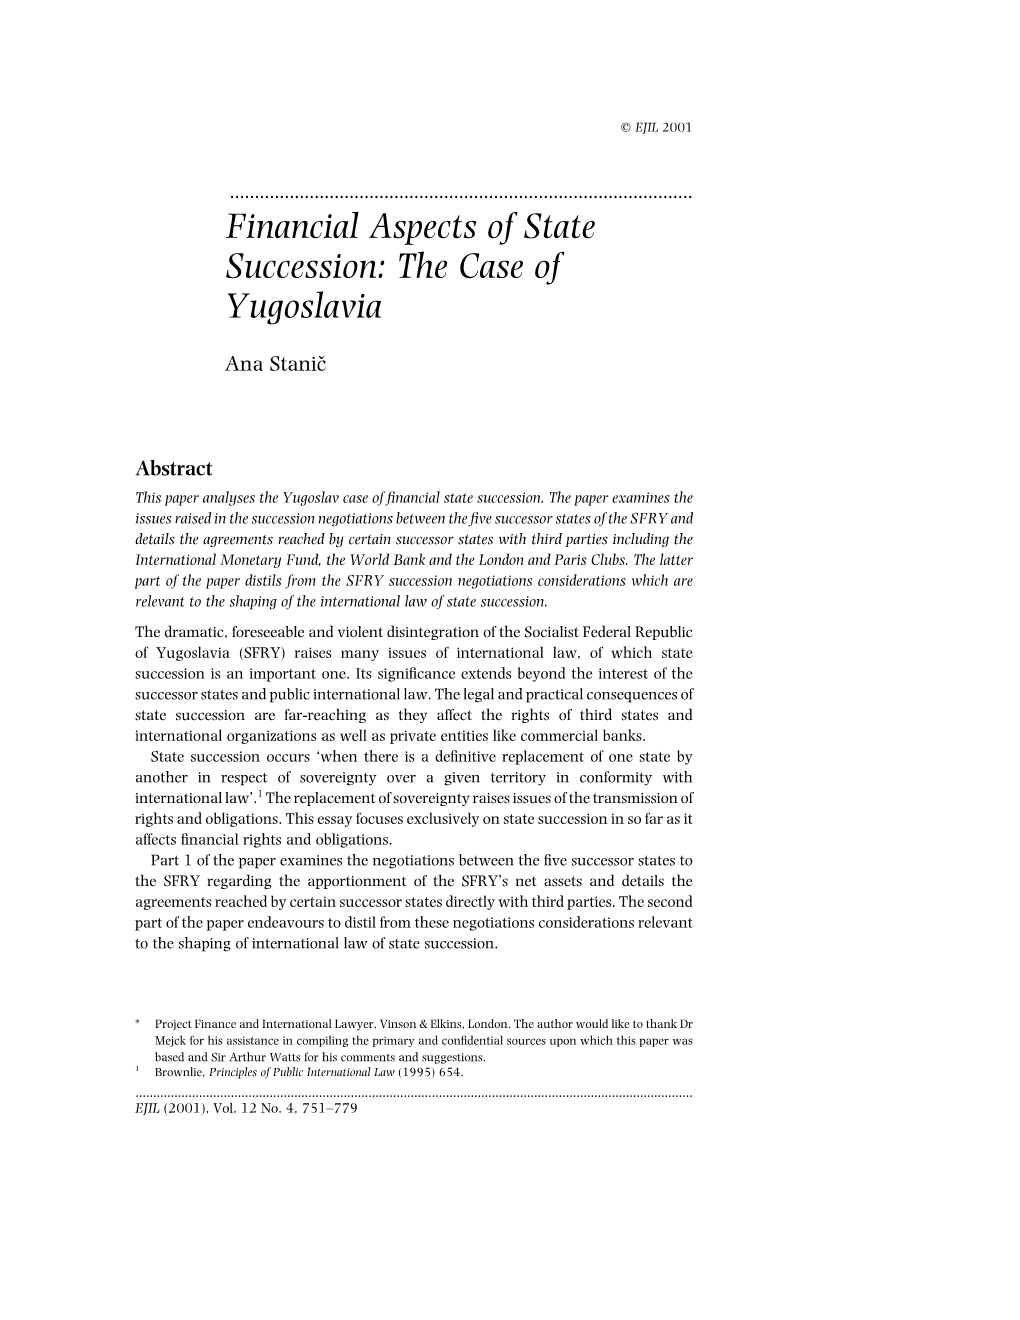 Financial Aspects of State Succession: the Case of Yugoslavia